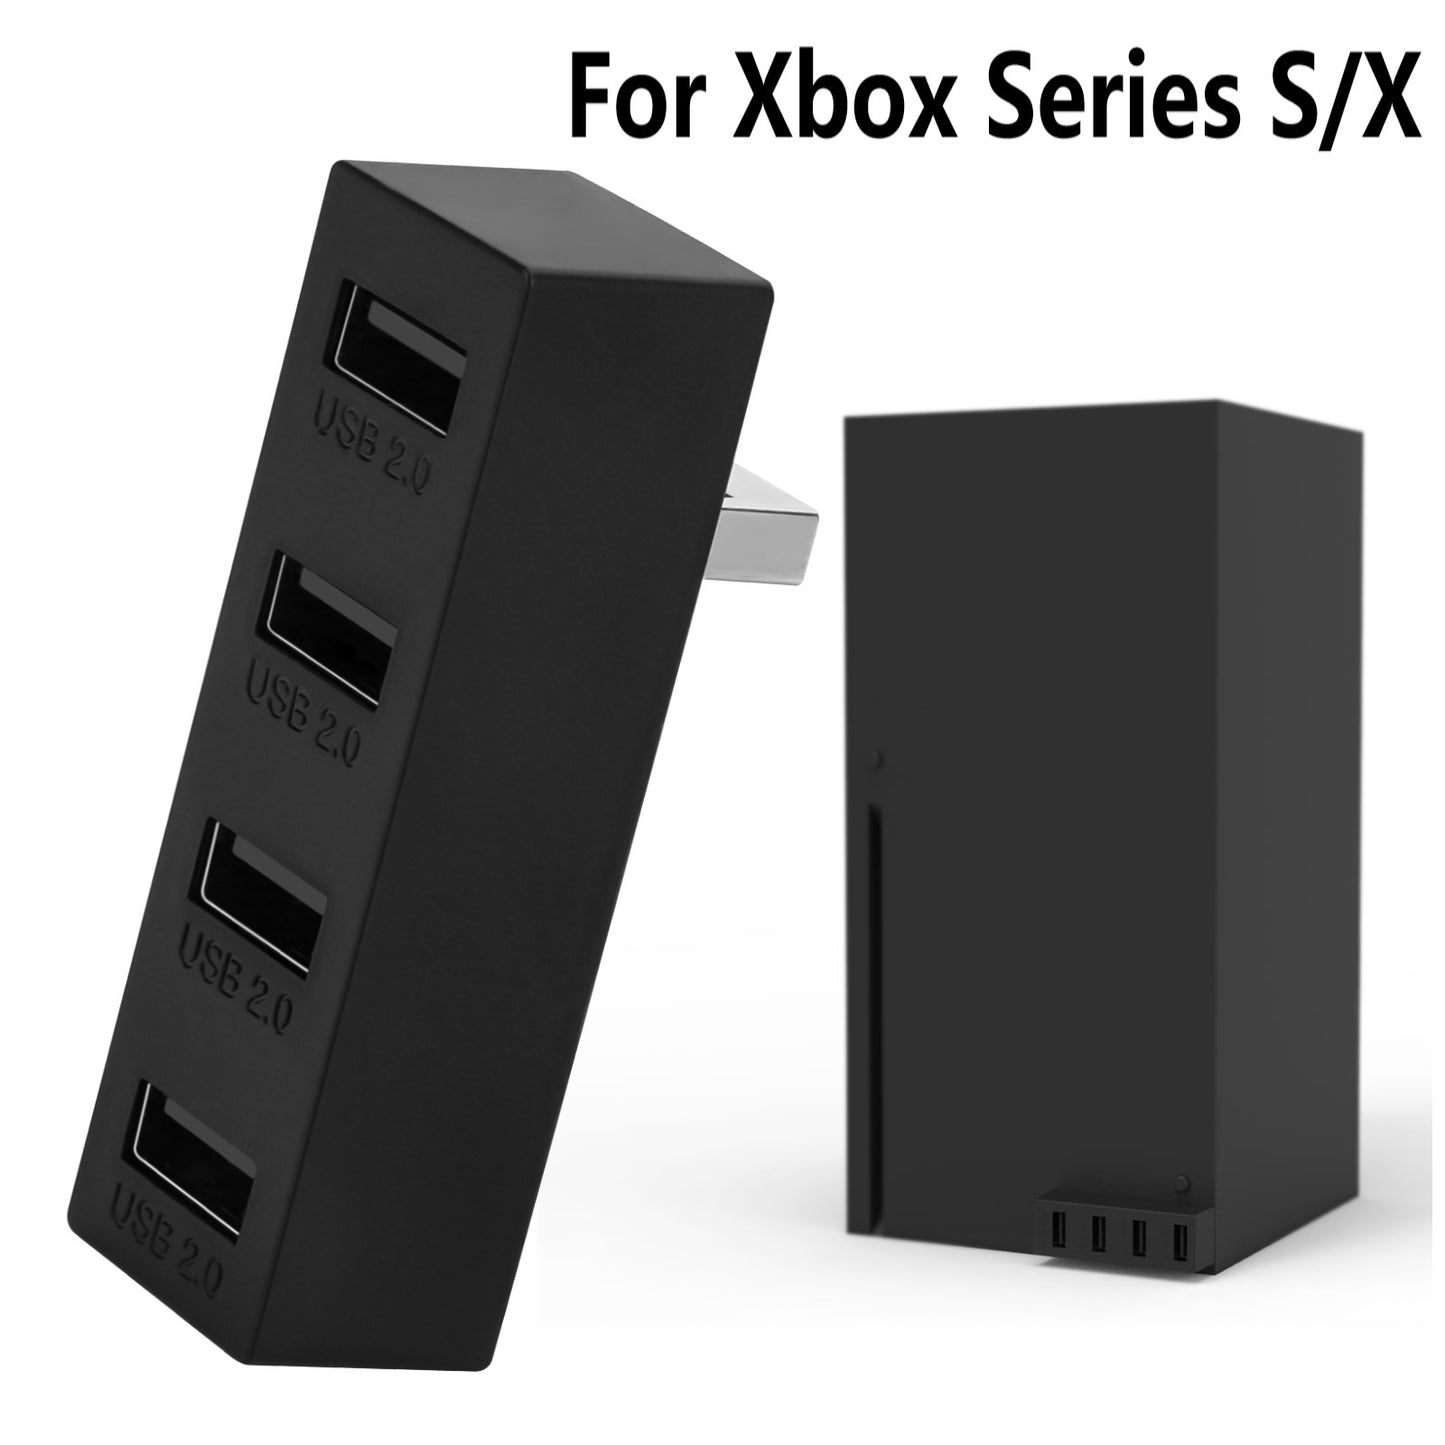 4 Ports USB Hub 2.0 for Xbox Series X/S - Lightweight & Compact Design - Seamless Connectivity for Controllers, Keyboards, and More,Stable Data Transmission, Plug and Play Convenience（black）